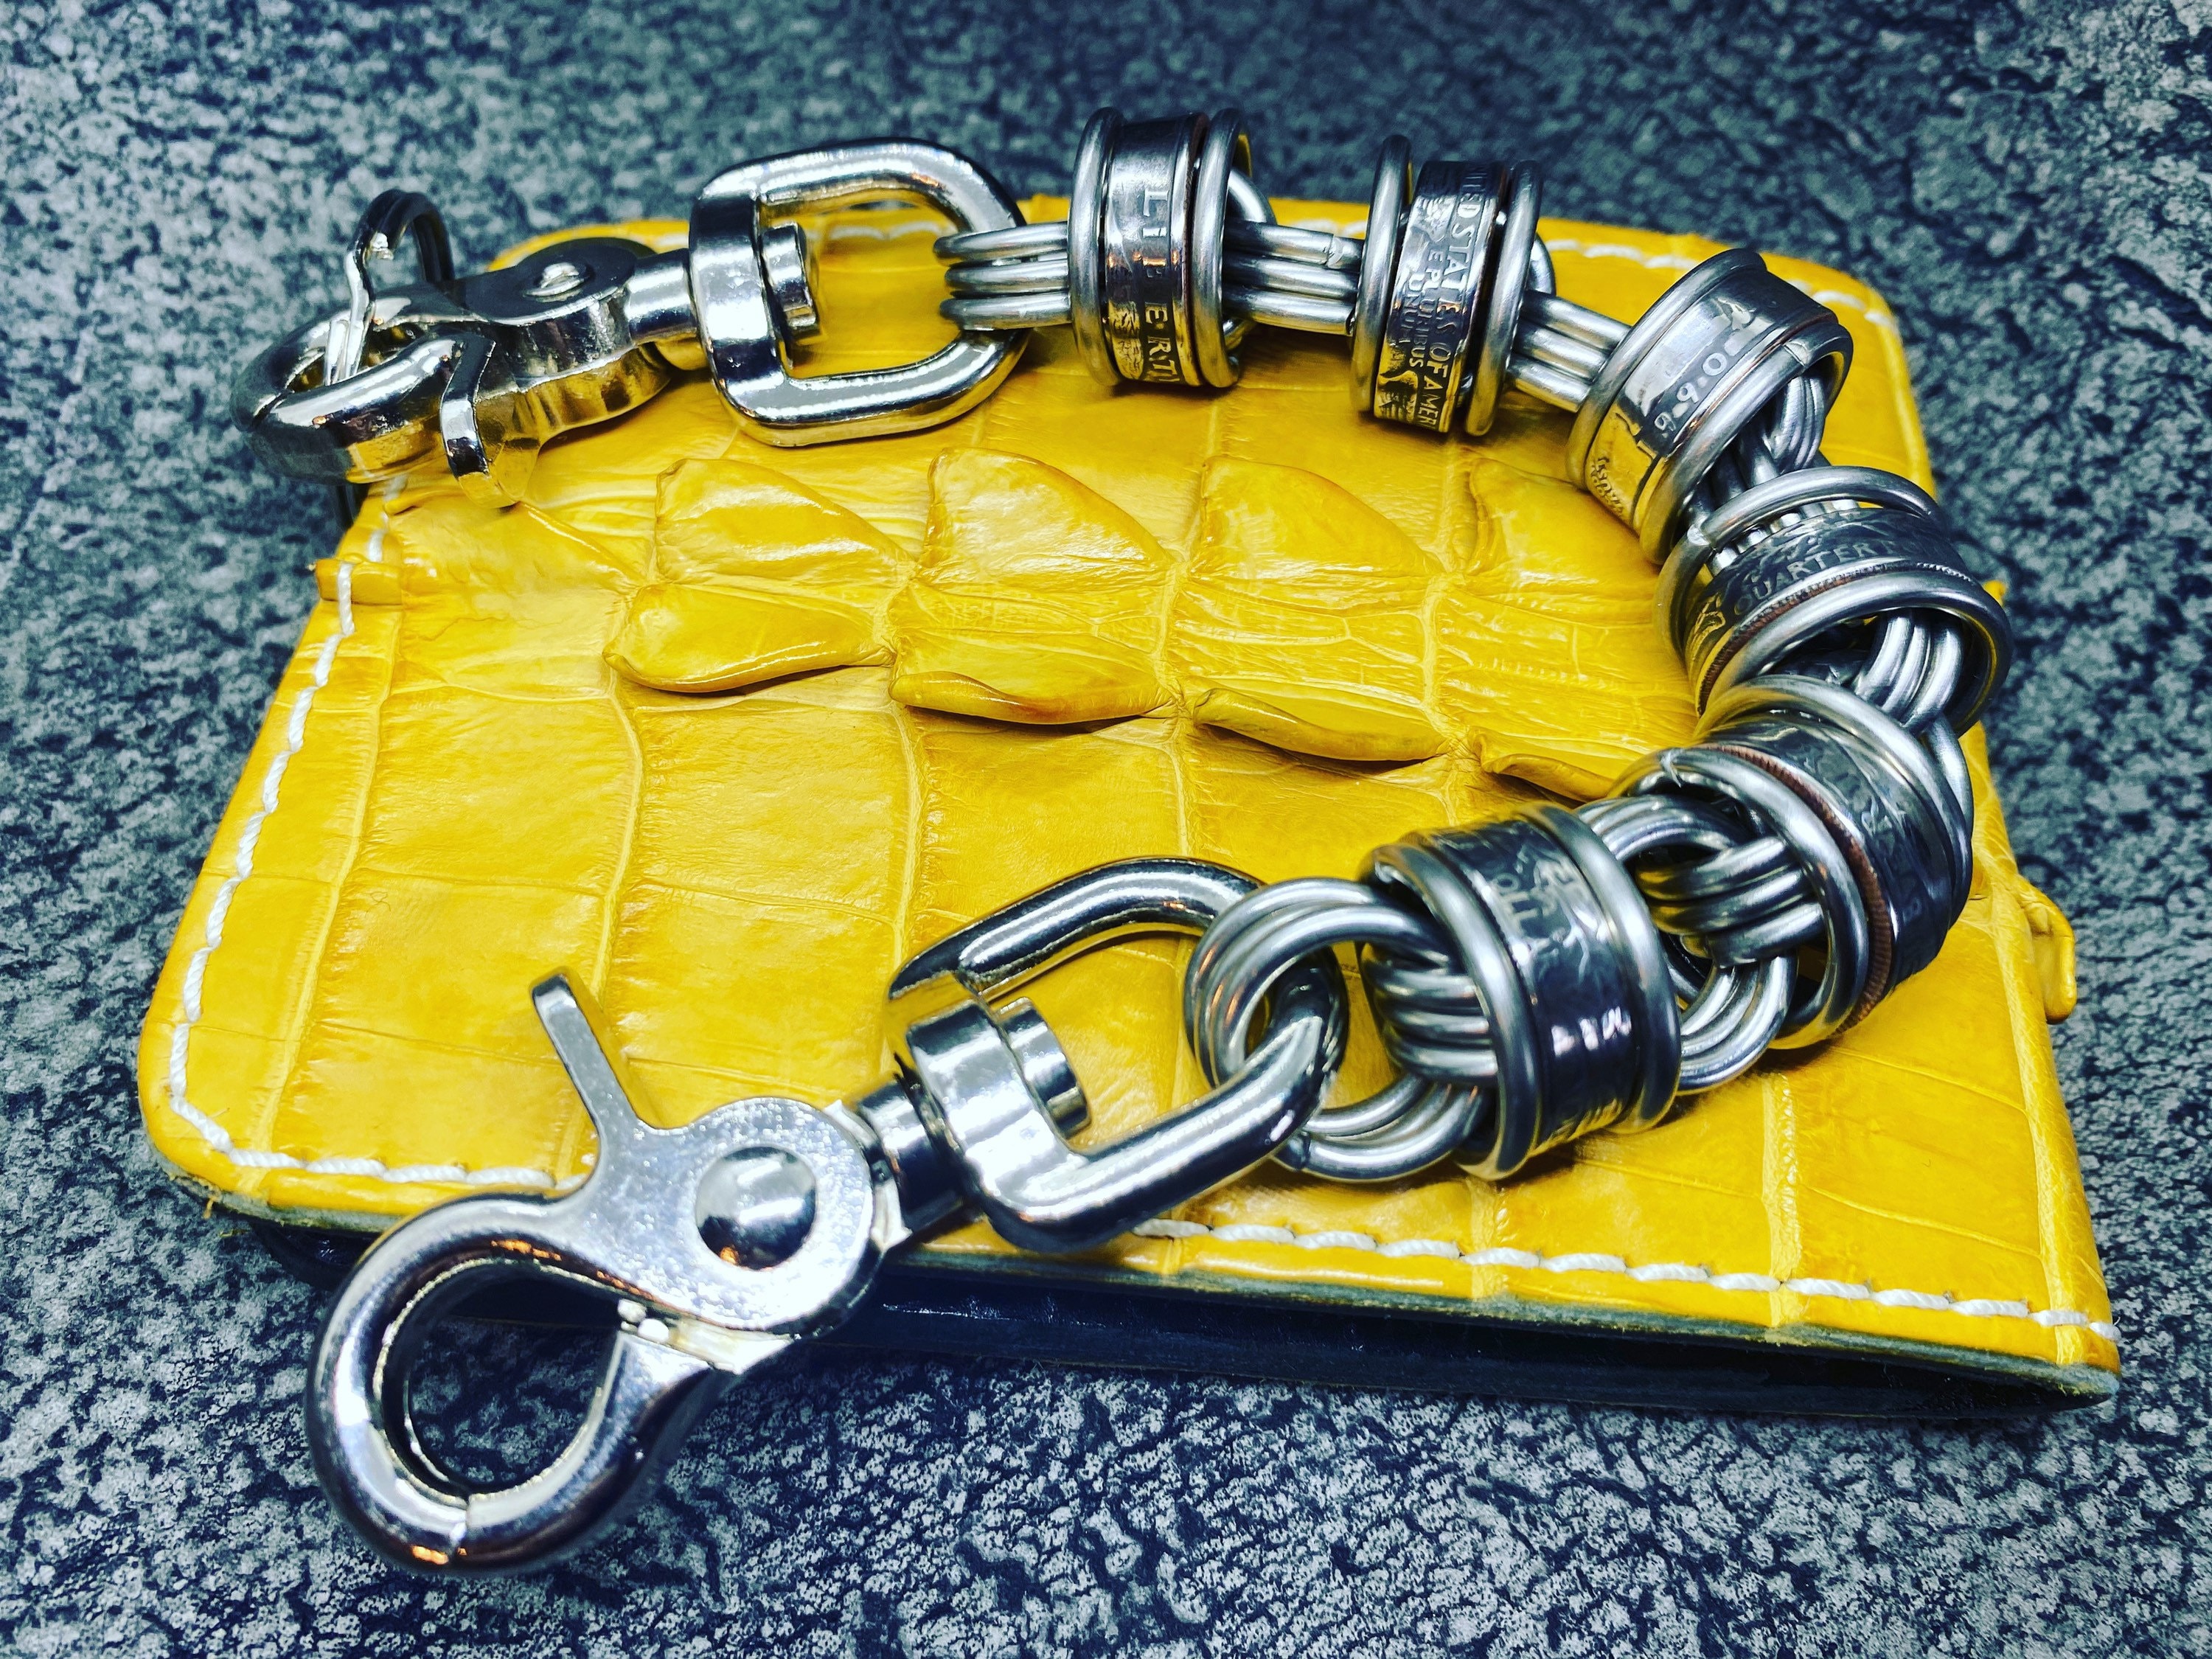 Anvil Customs Chainmaille Wallet Chain Clasp - Brass